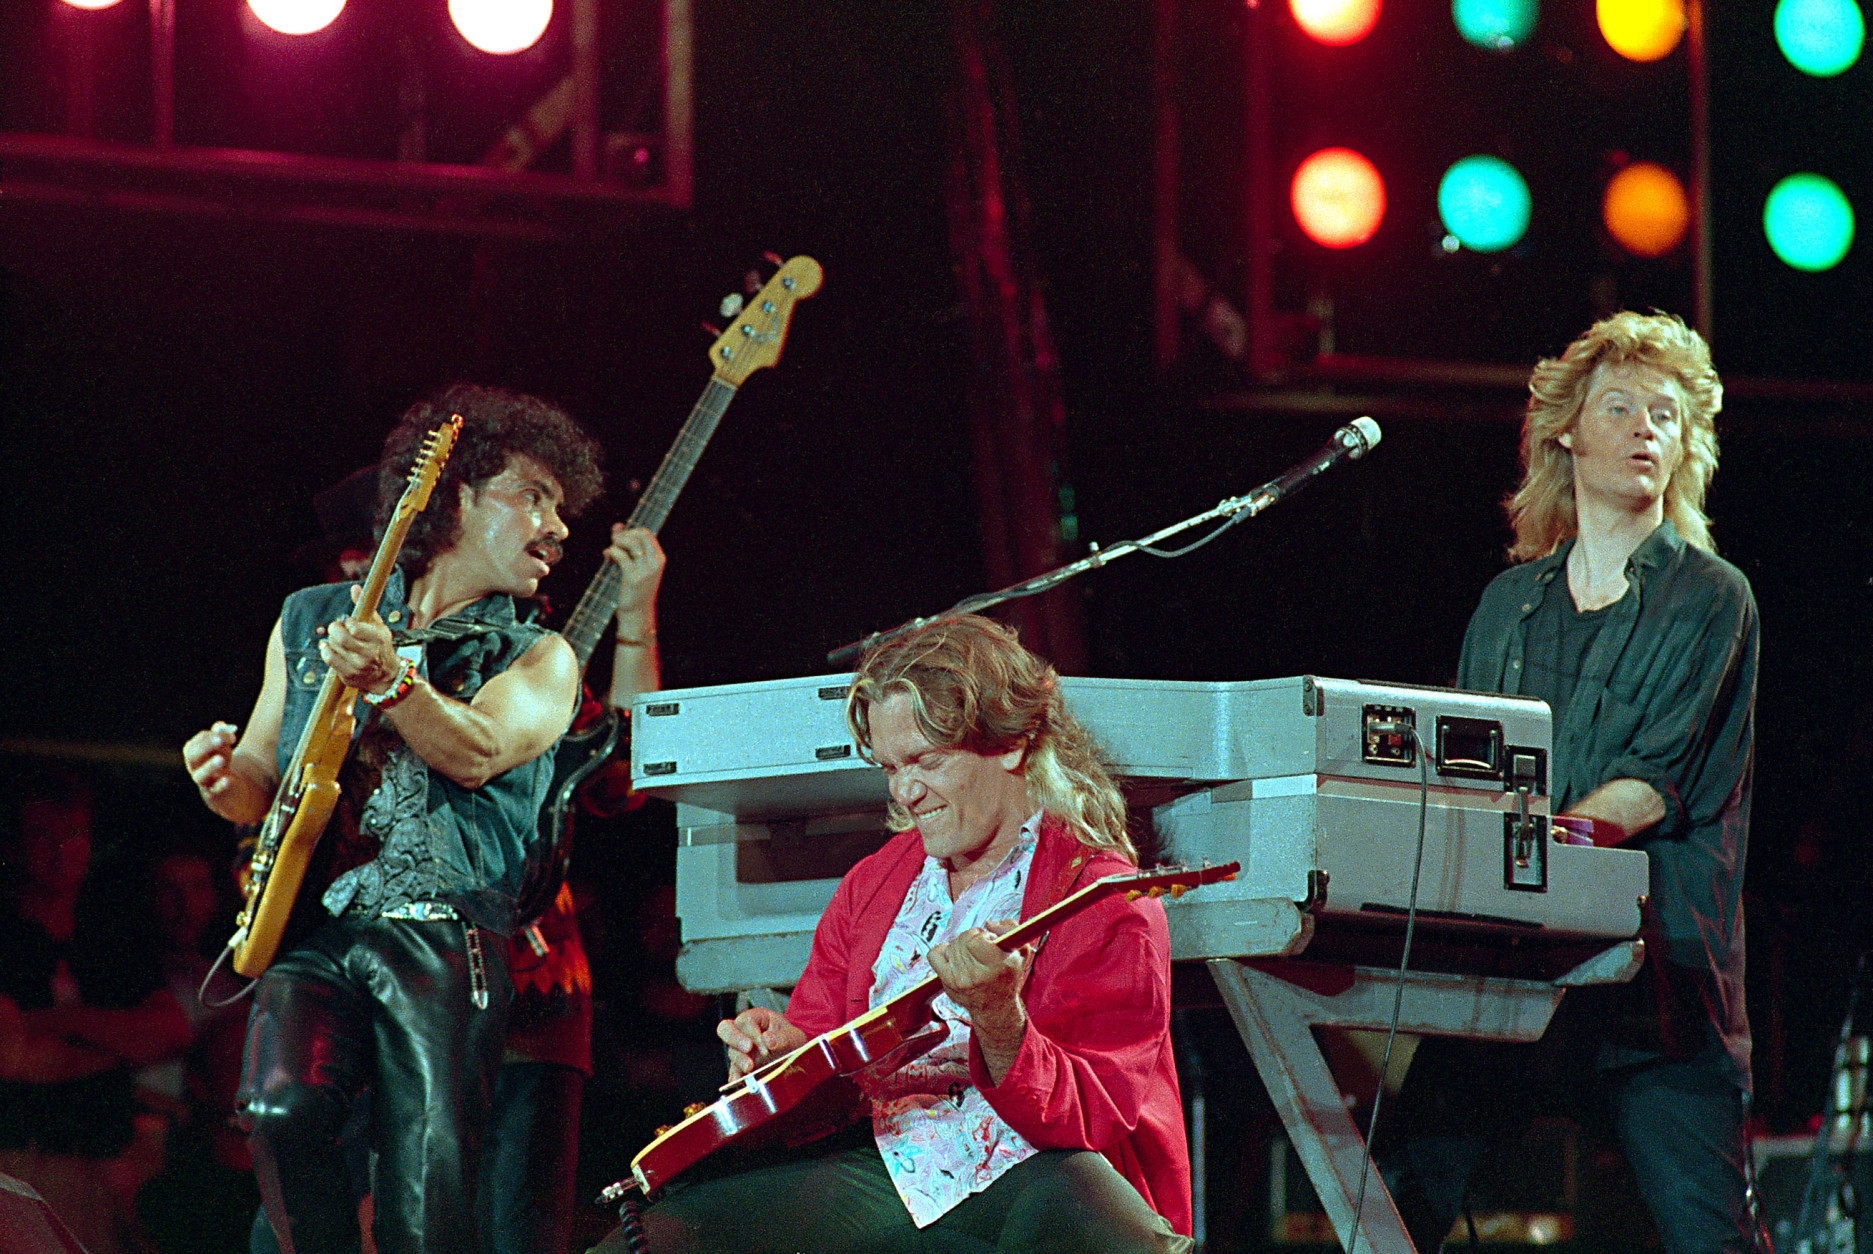 From left, John Oates, G.E. Smith and Daryl Hall perform collectively as Hall and Oates onstage at JFK Stadium in Philadelphia Pa. for the Live Aid famine relief concert July 13, 1985.(AP Photo/Amy Sancetta)